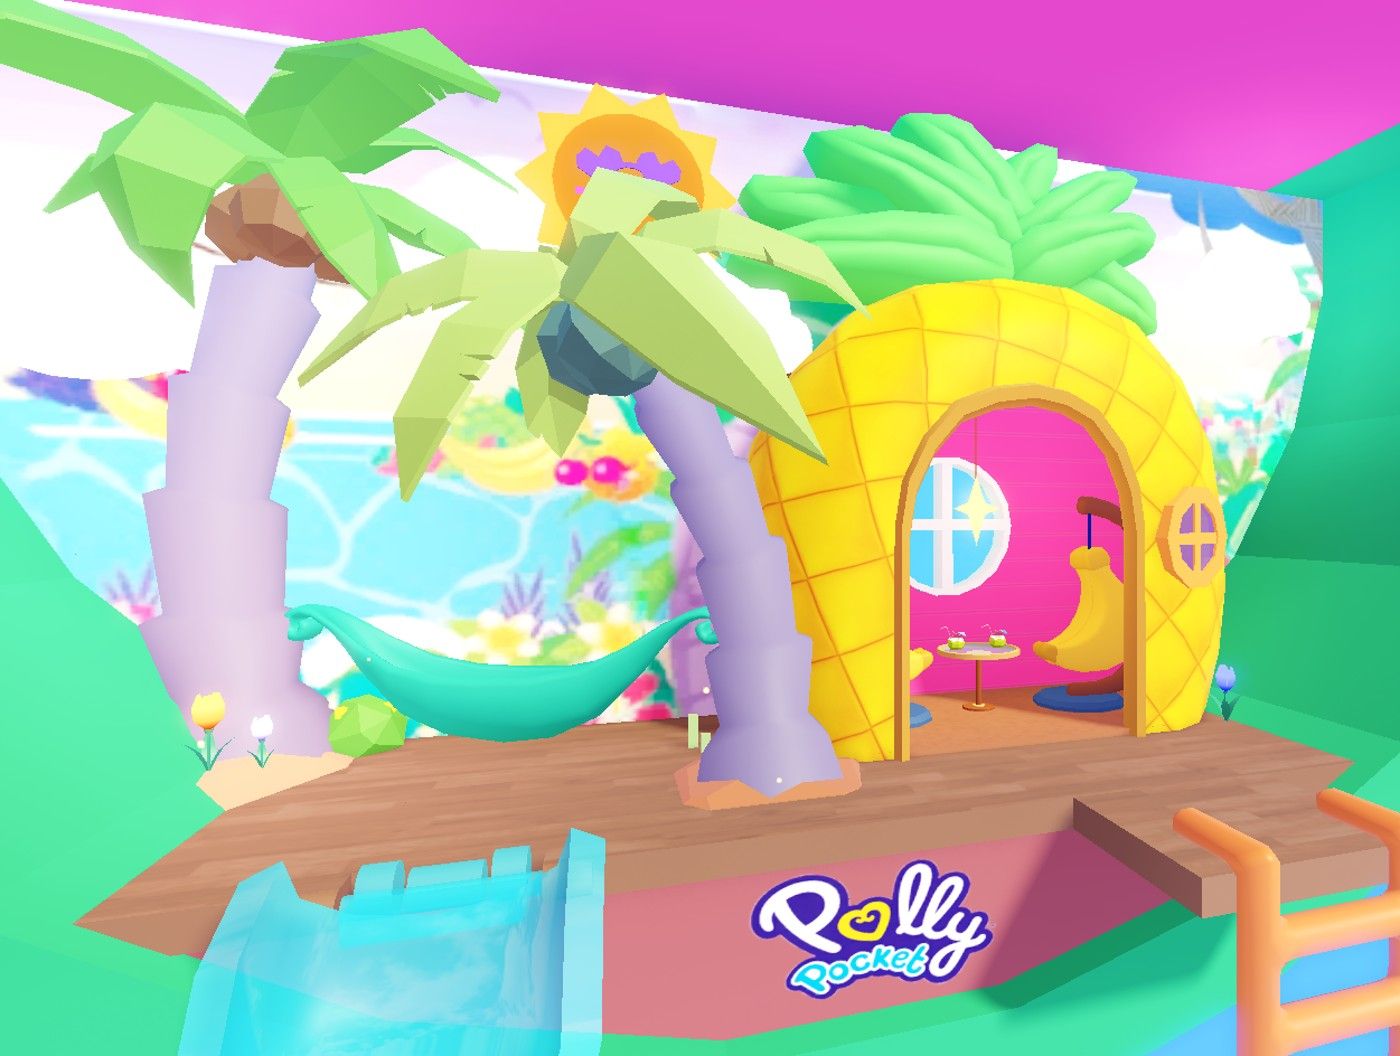 Roblox Polly Pocket pineapple house.